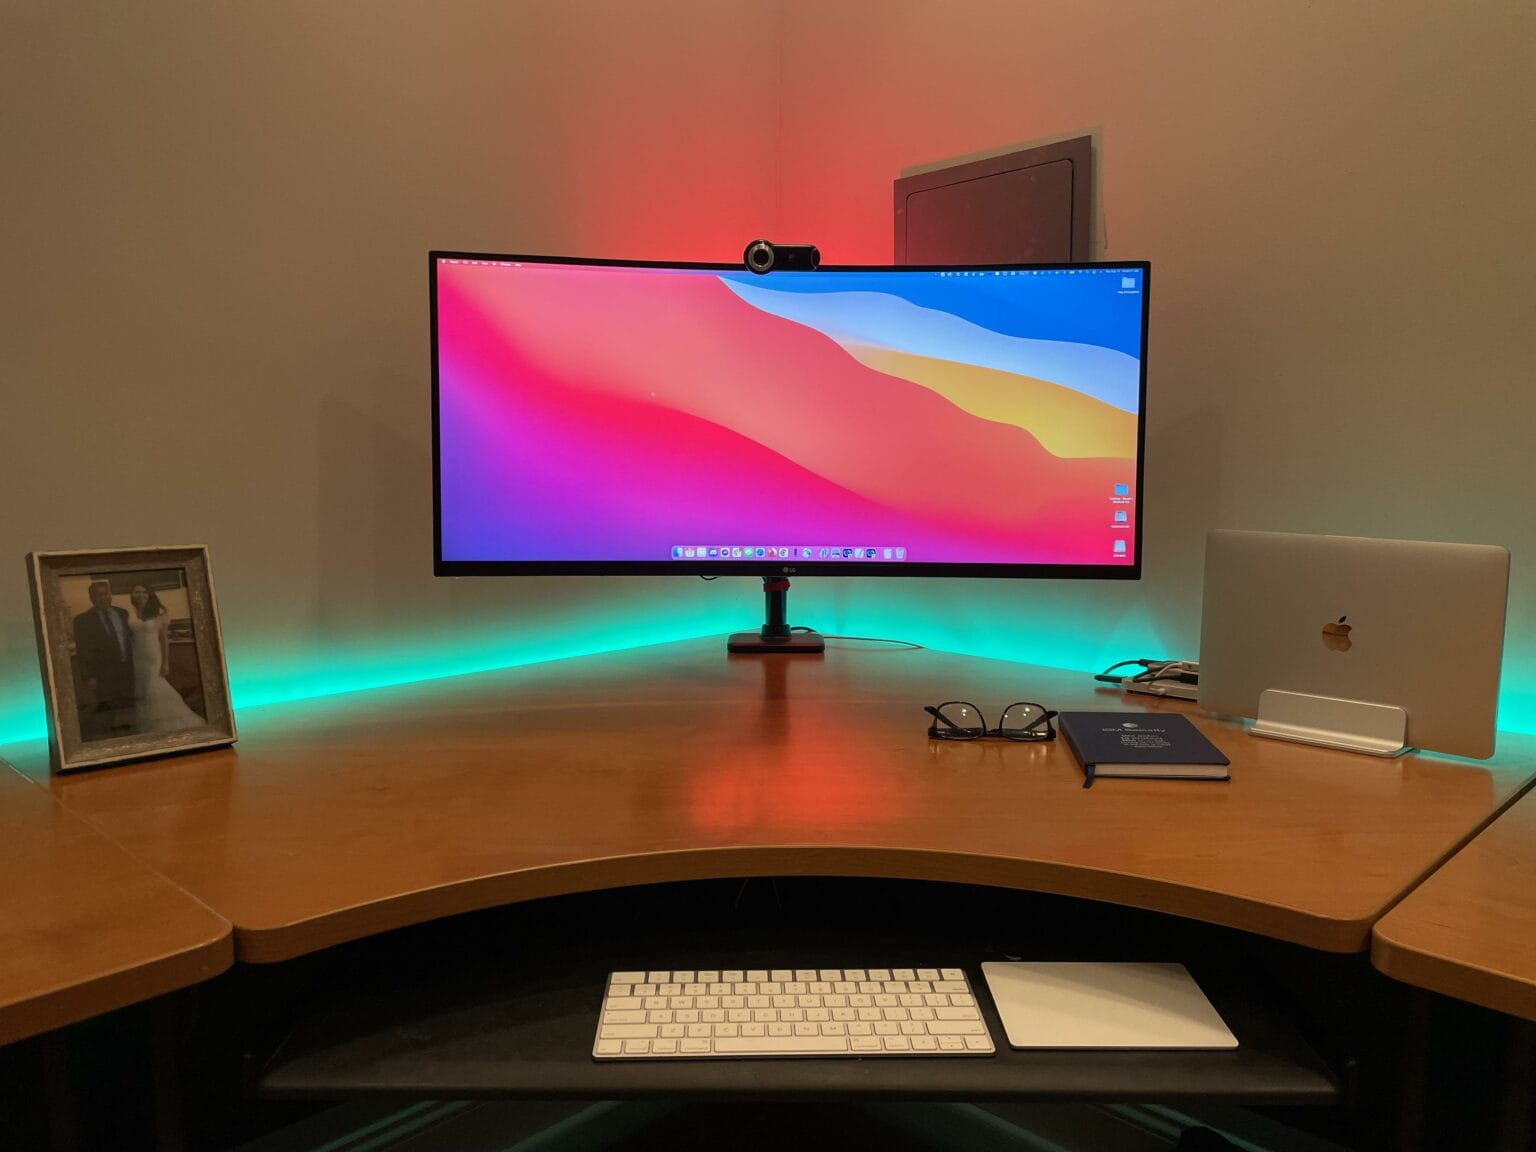 Would you put a 28-inch 4K monitor on top of this 35-inch display, or next to it?